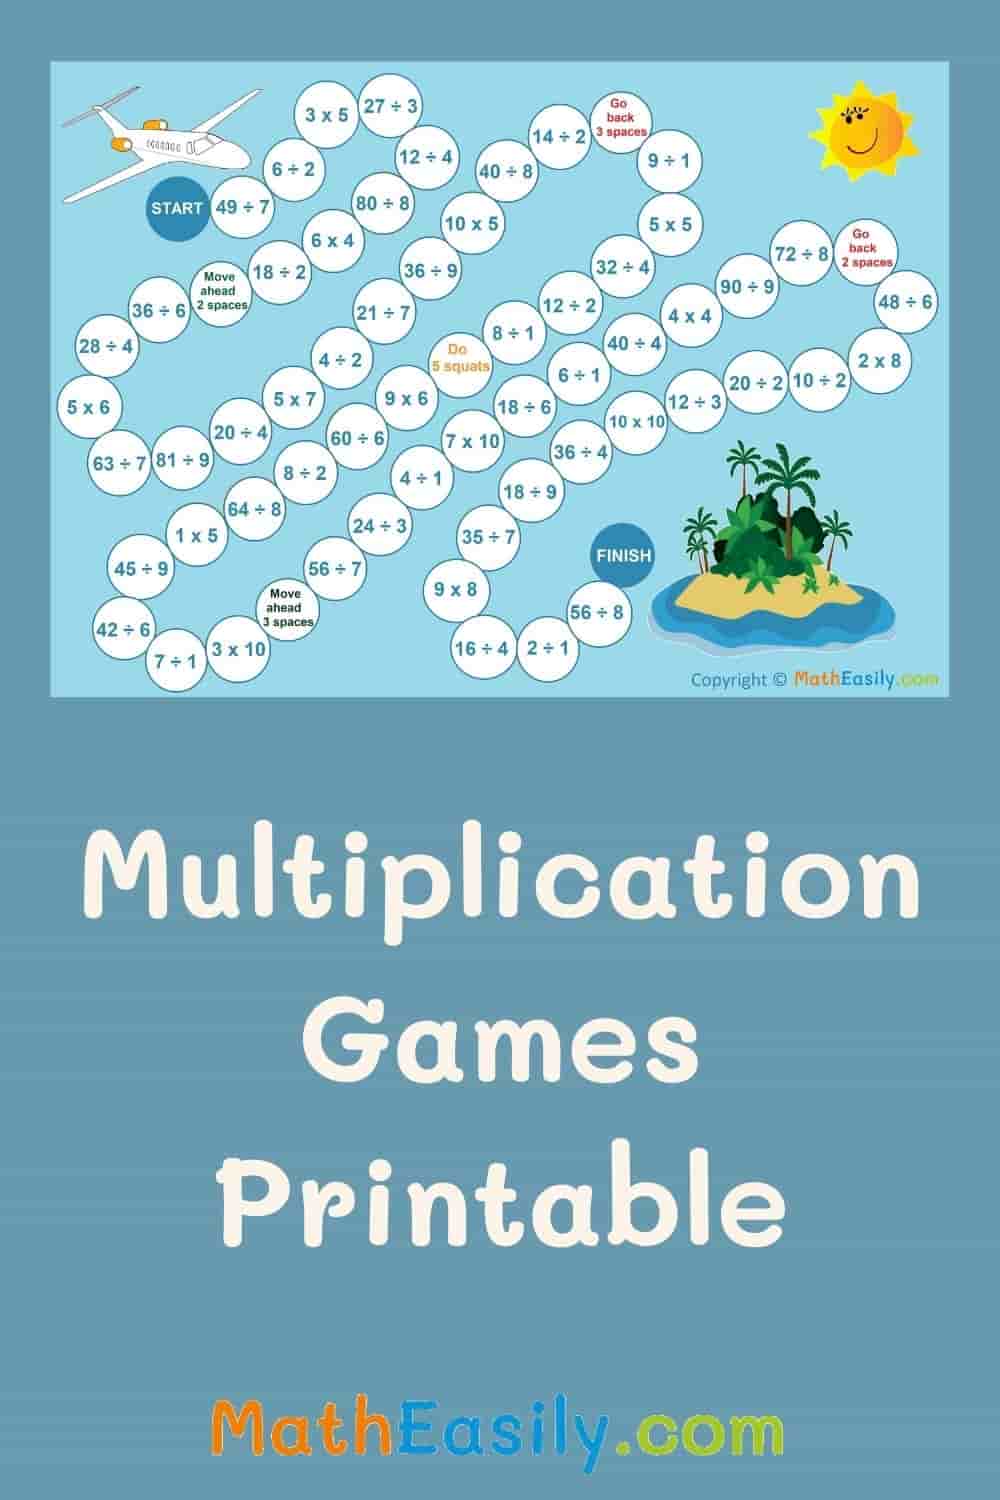 multiplication and division board games to print. Multiplication printable games ideas. 
   Free Printable Multiplication Board Games PDF. homemade multiplication board games printable. DIY multiplication games PDF